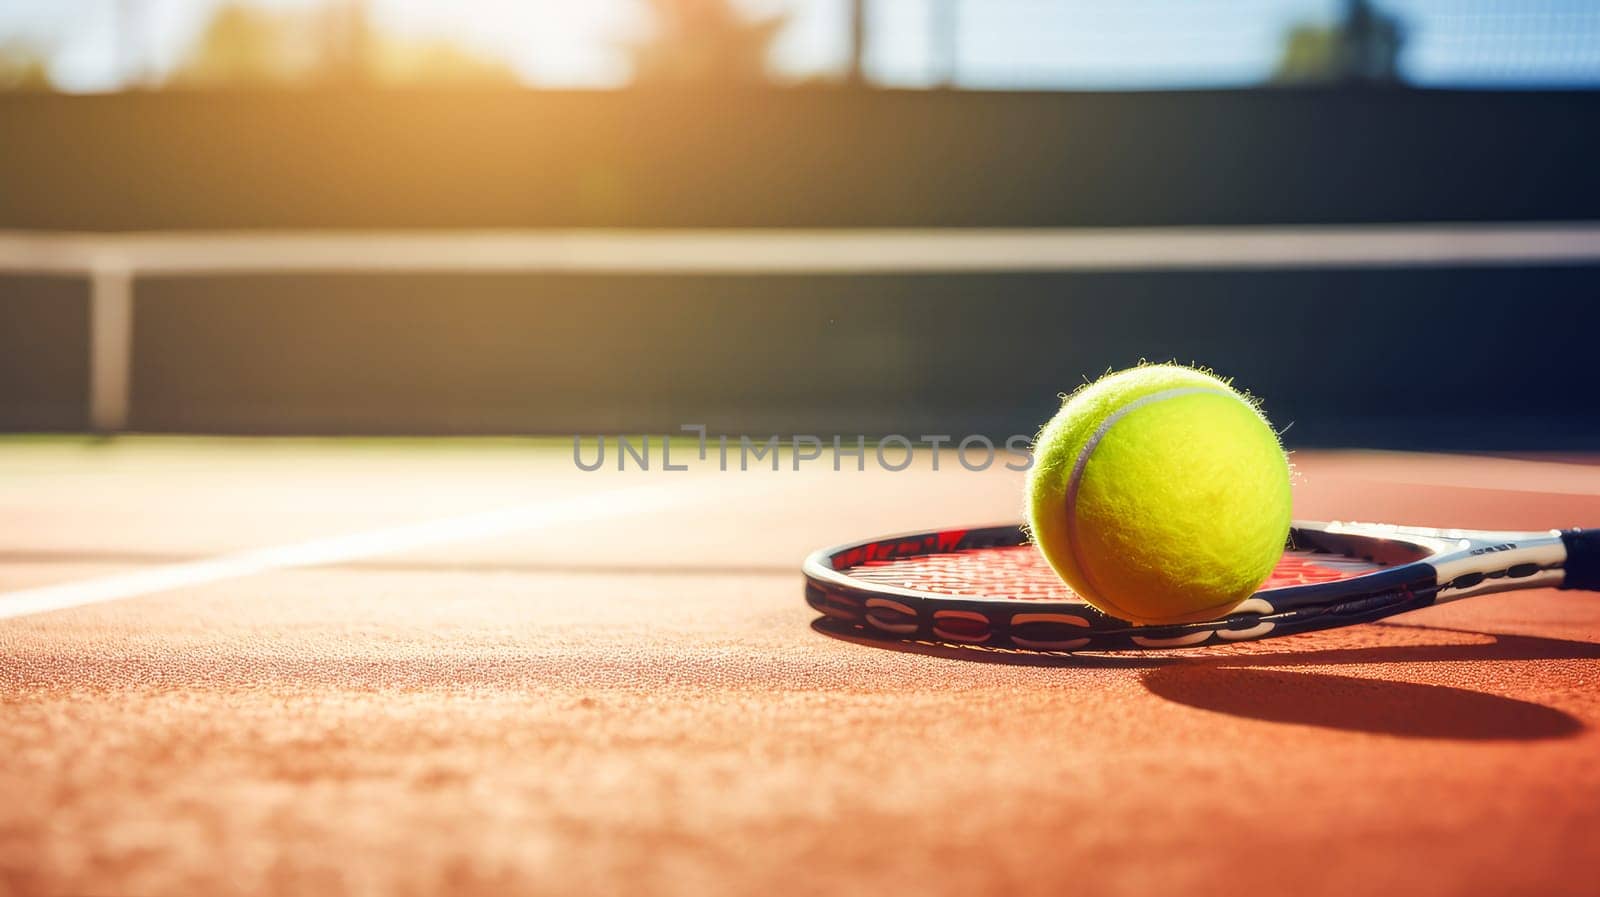 Detail of a tennis ball stopped on the ground of a clay tennis court during a sunny day by Alla_Yurtayeva